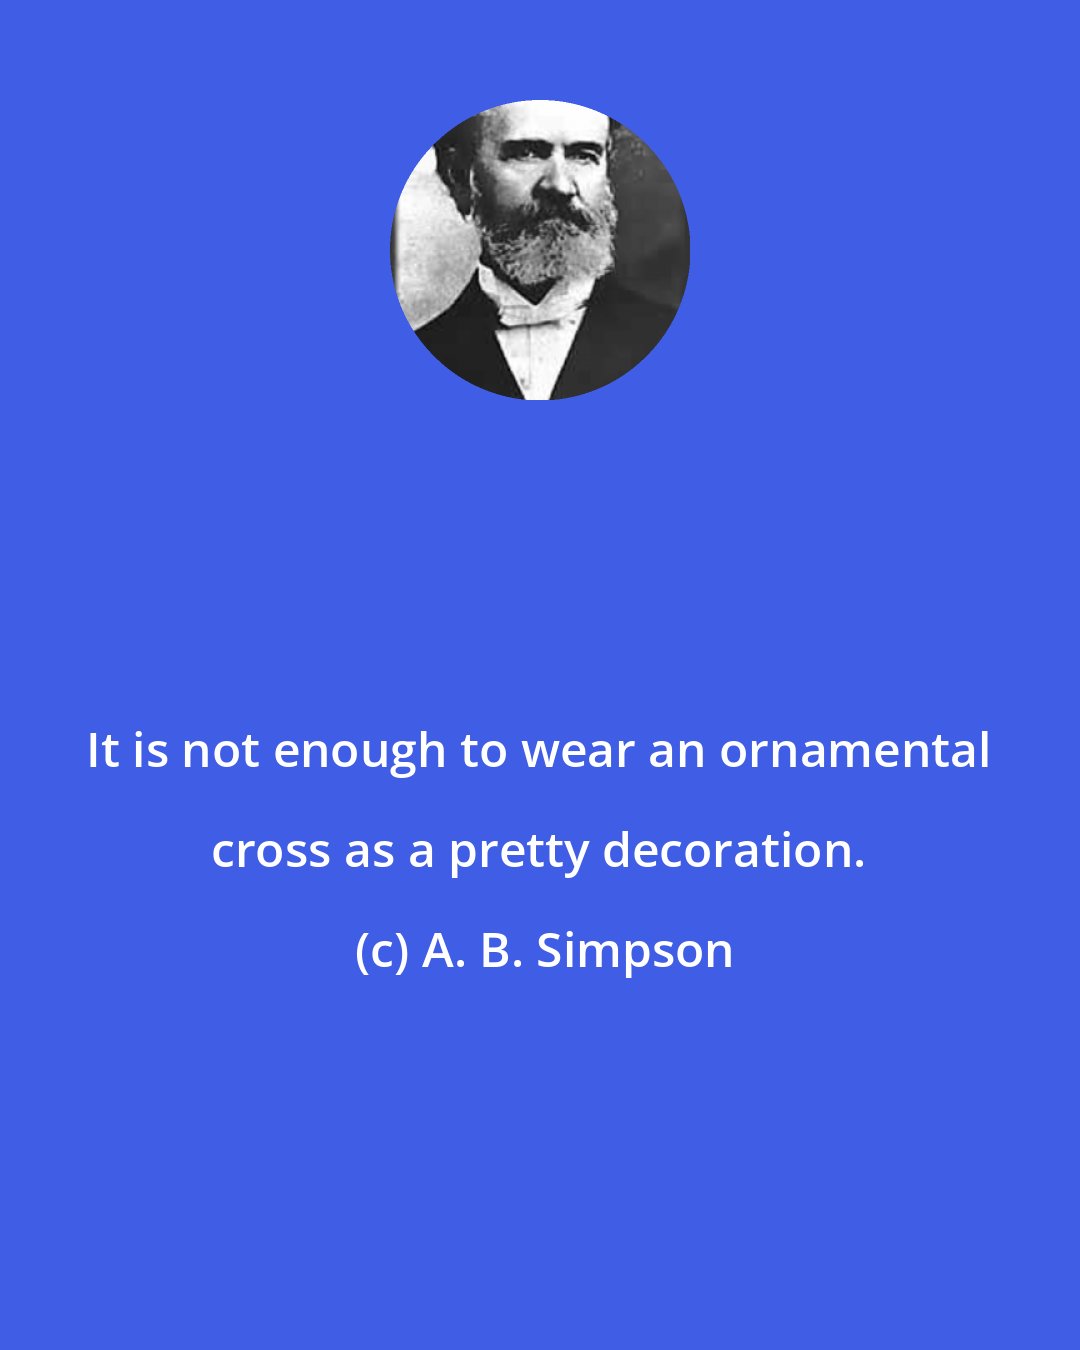 A. B. Simpson: It is not enough to wear an ornamental cross as a pretty decoration.